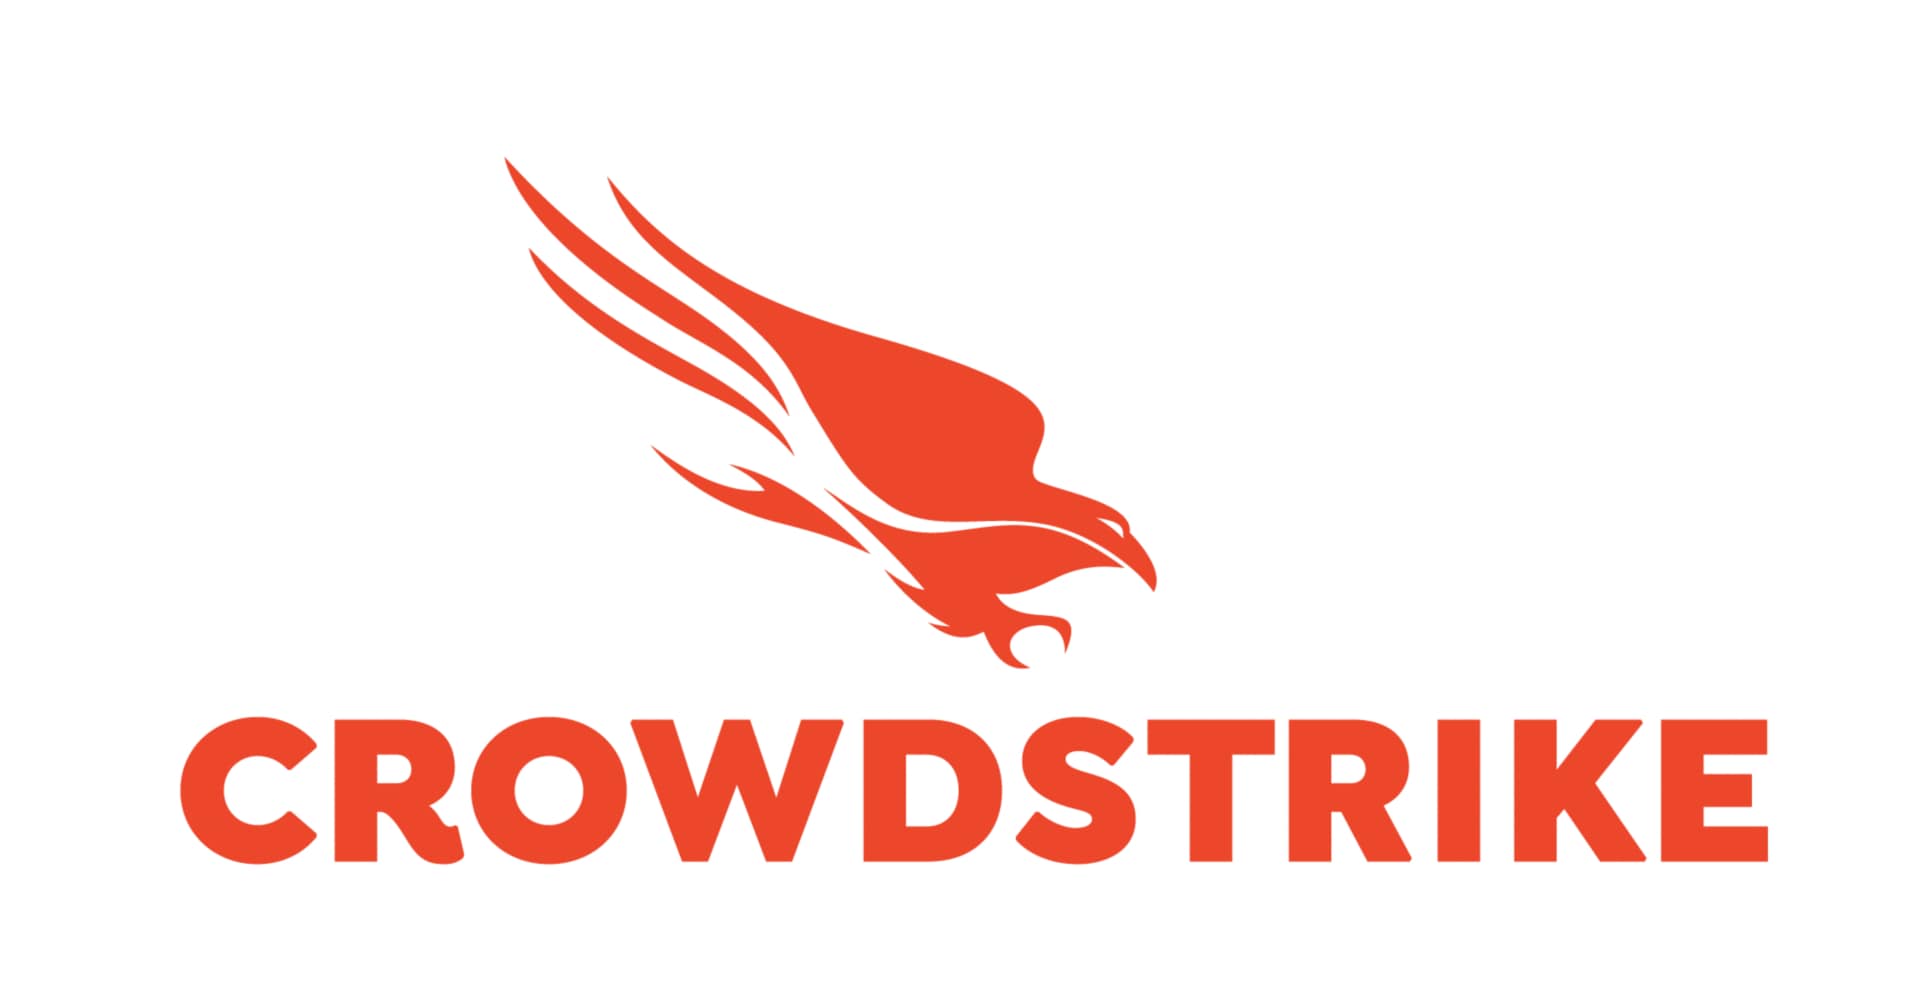 CrowdStrike 24-Month Falcon Prevent for Home Use Software